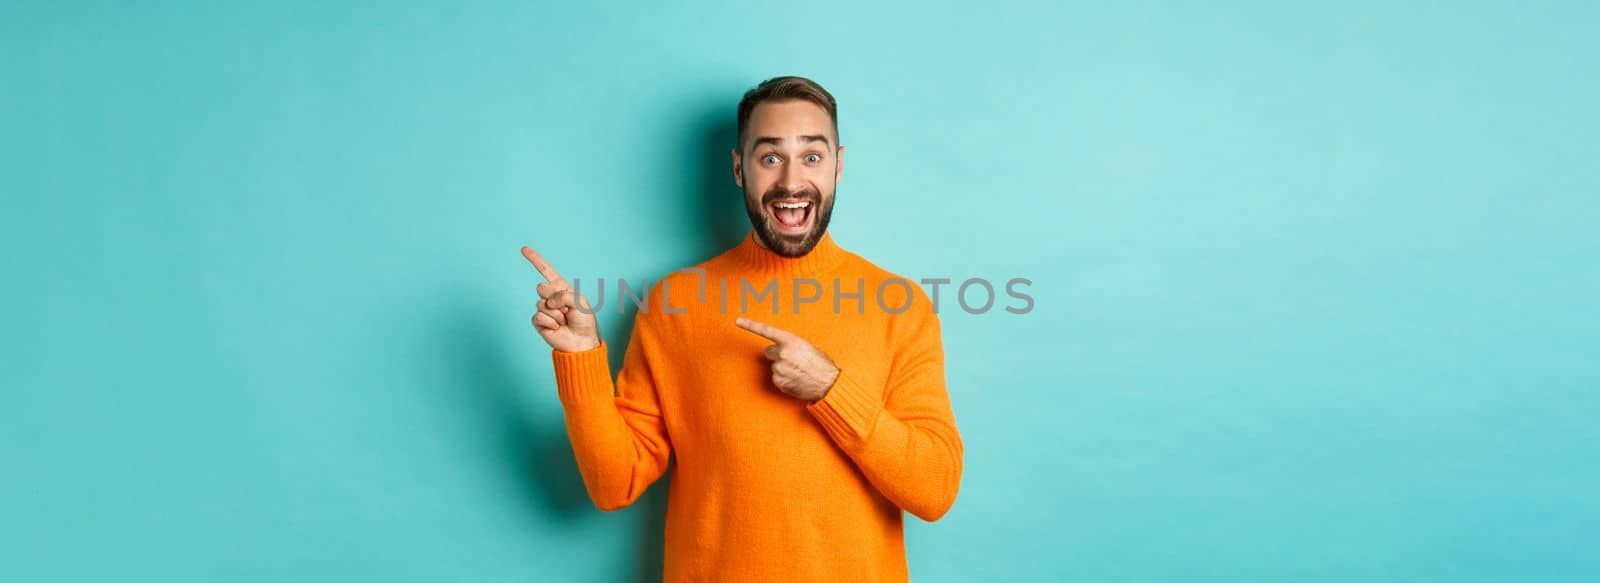 Excited man making an announcement, pointing fingers right your logo, standing over turquoise background.